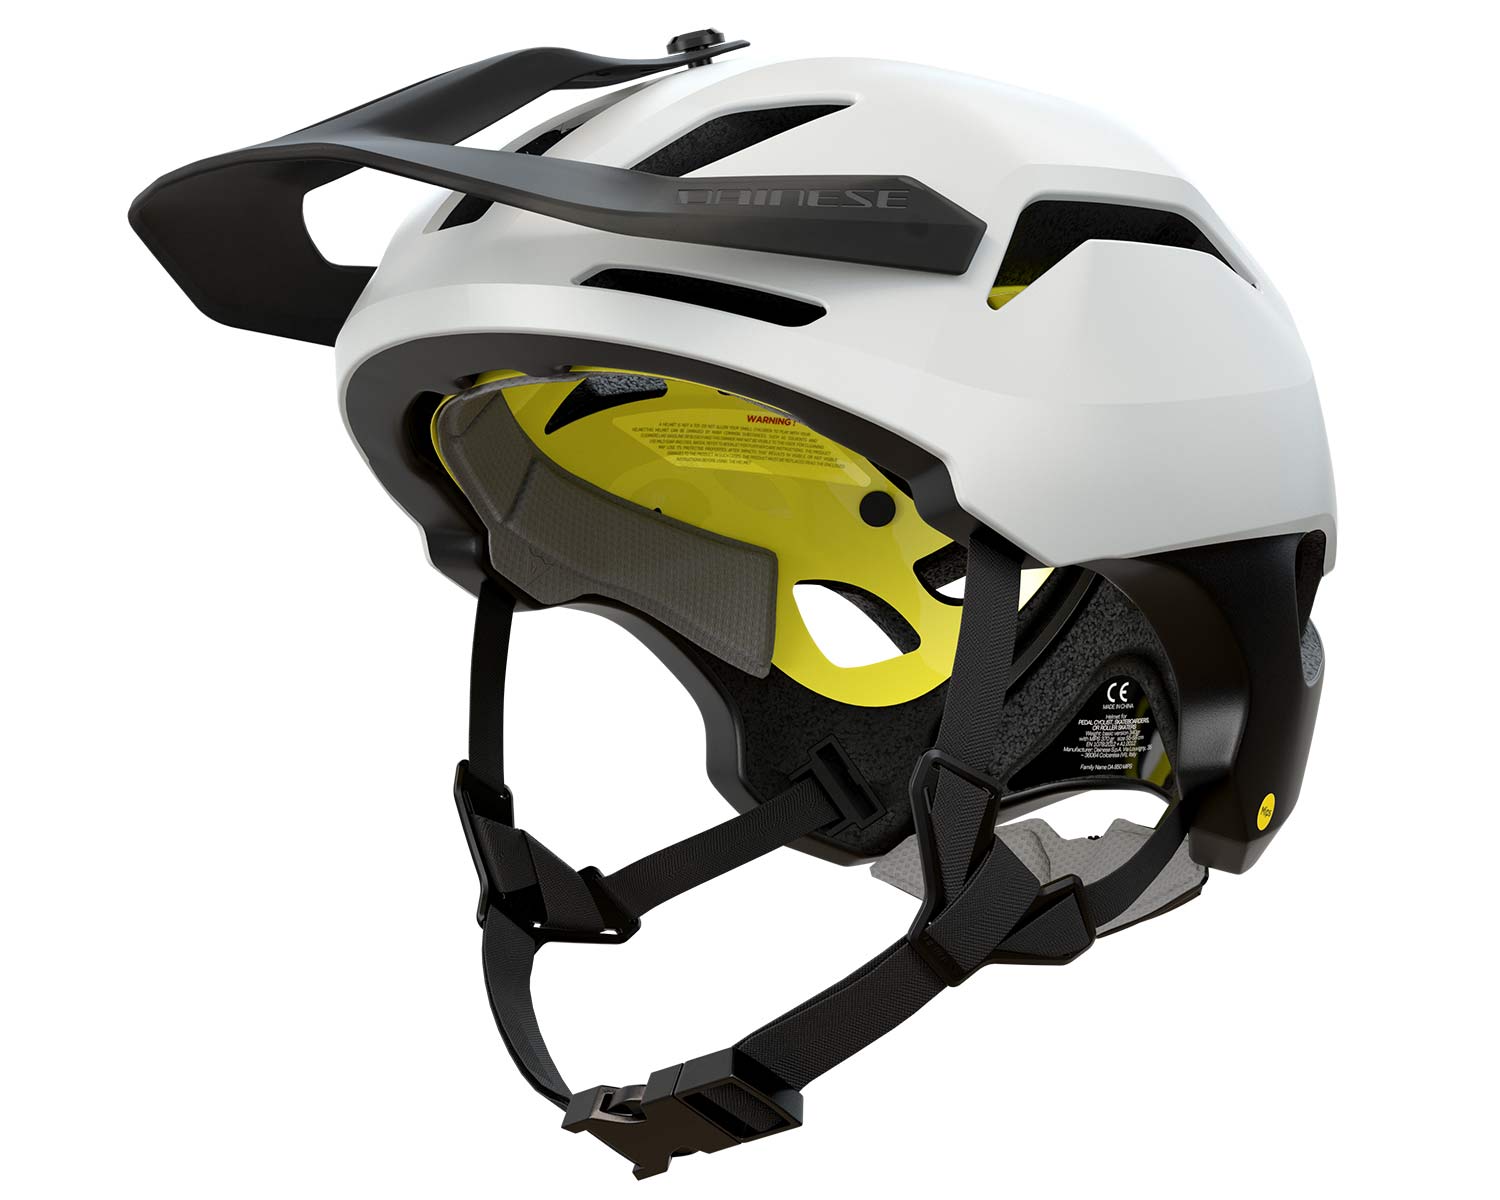 Dainese Linea 03 trail bike half shell helmet, lightweight MIPS Recco MTB protection at 370g